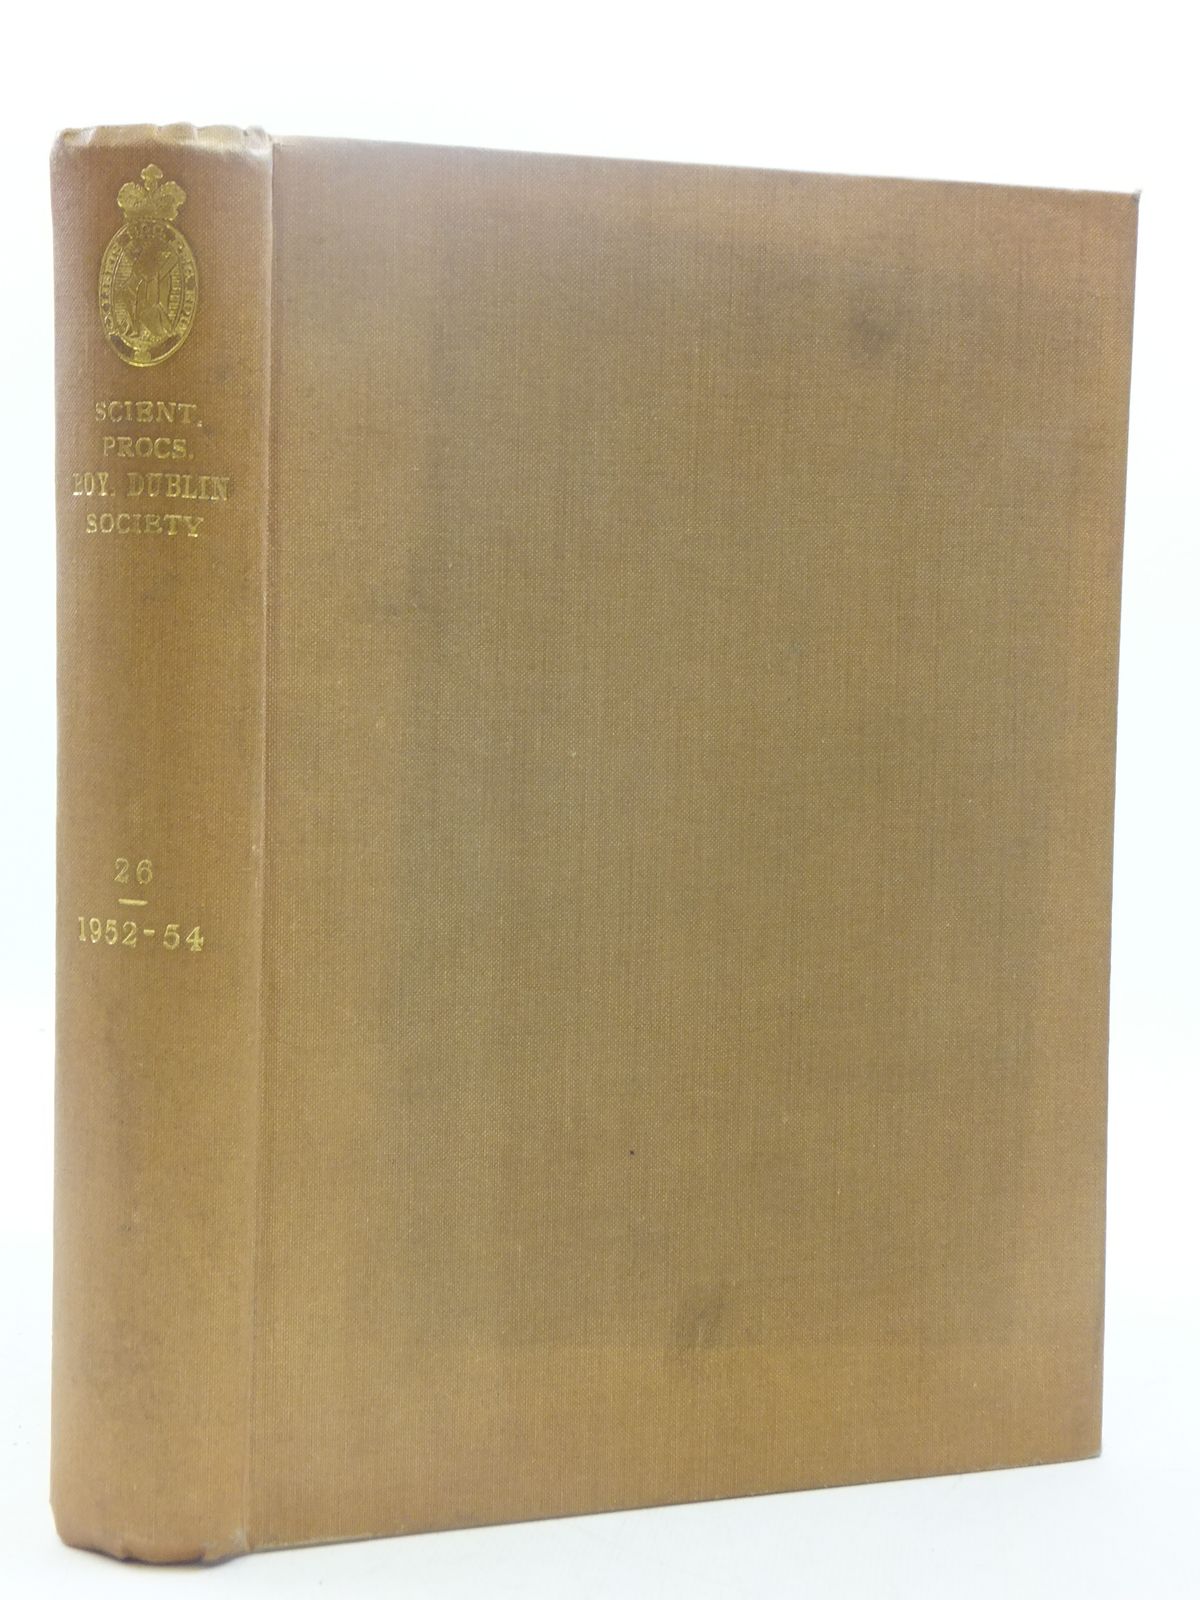 Photo of THE SCIENTIFIC PROCEEDINGS OF THE ROYAL DUBLIN SOCIETY VOLUME 26 (1952-54)- Stock Number: 1605206